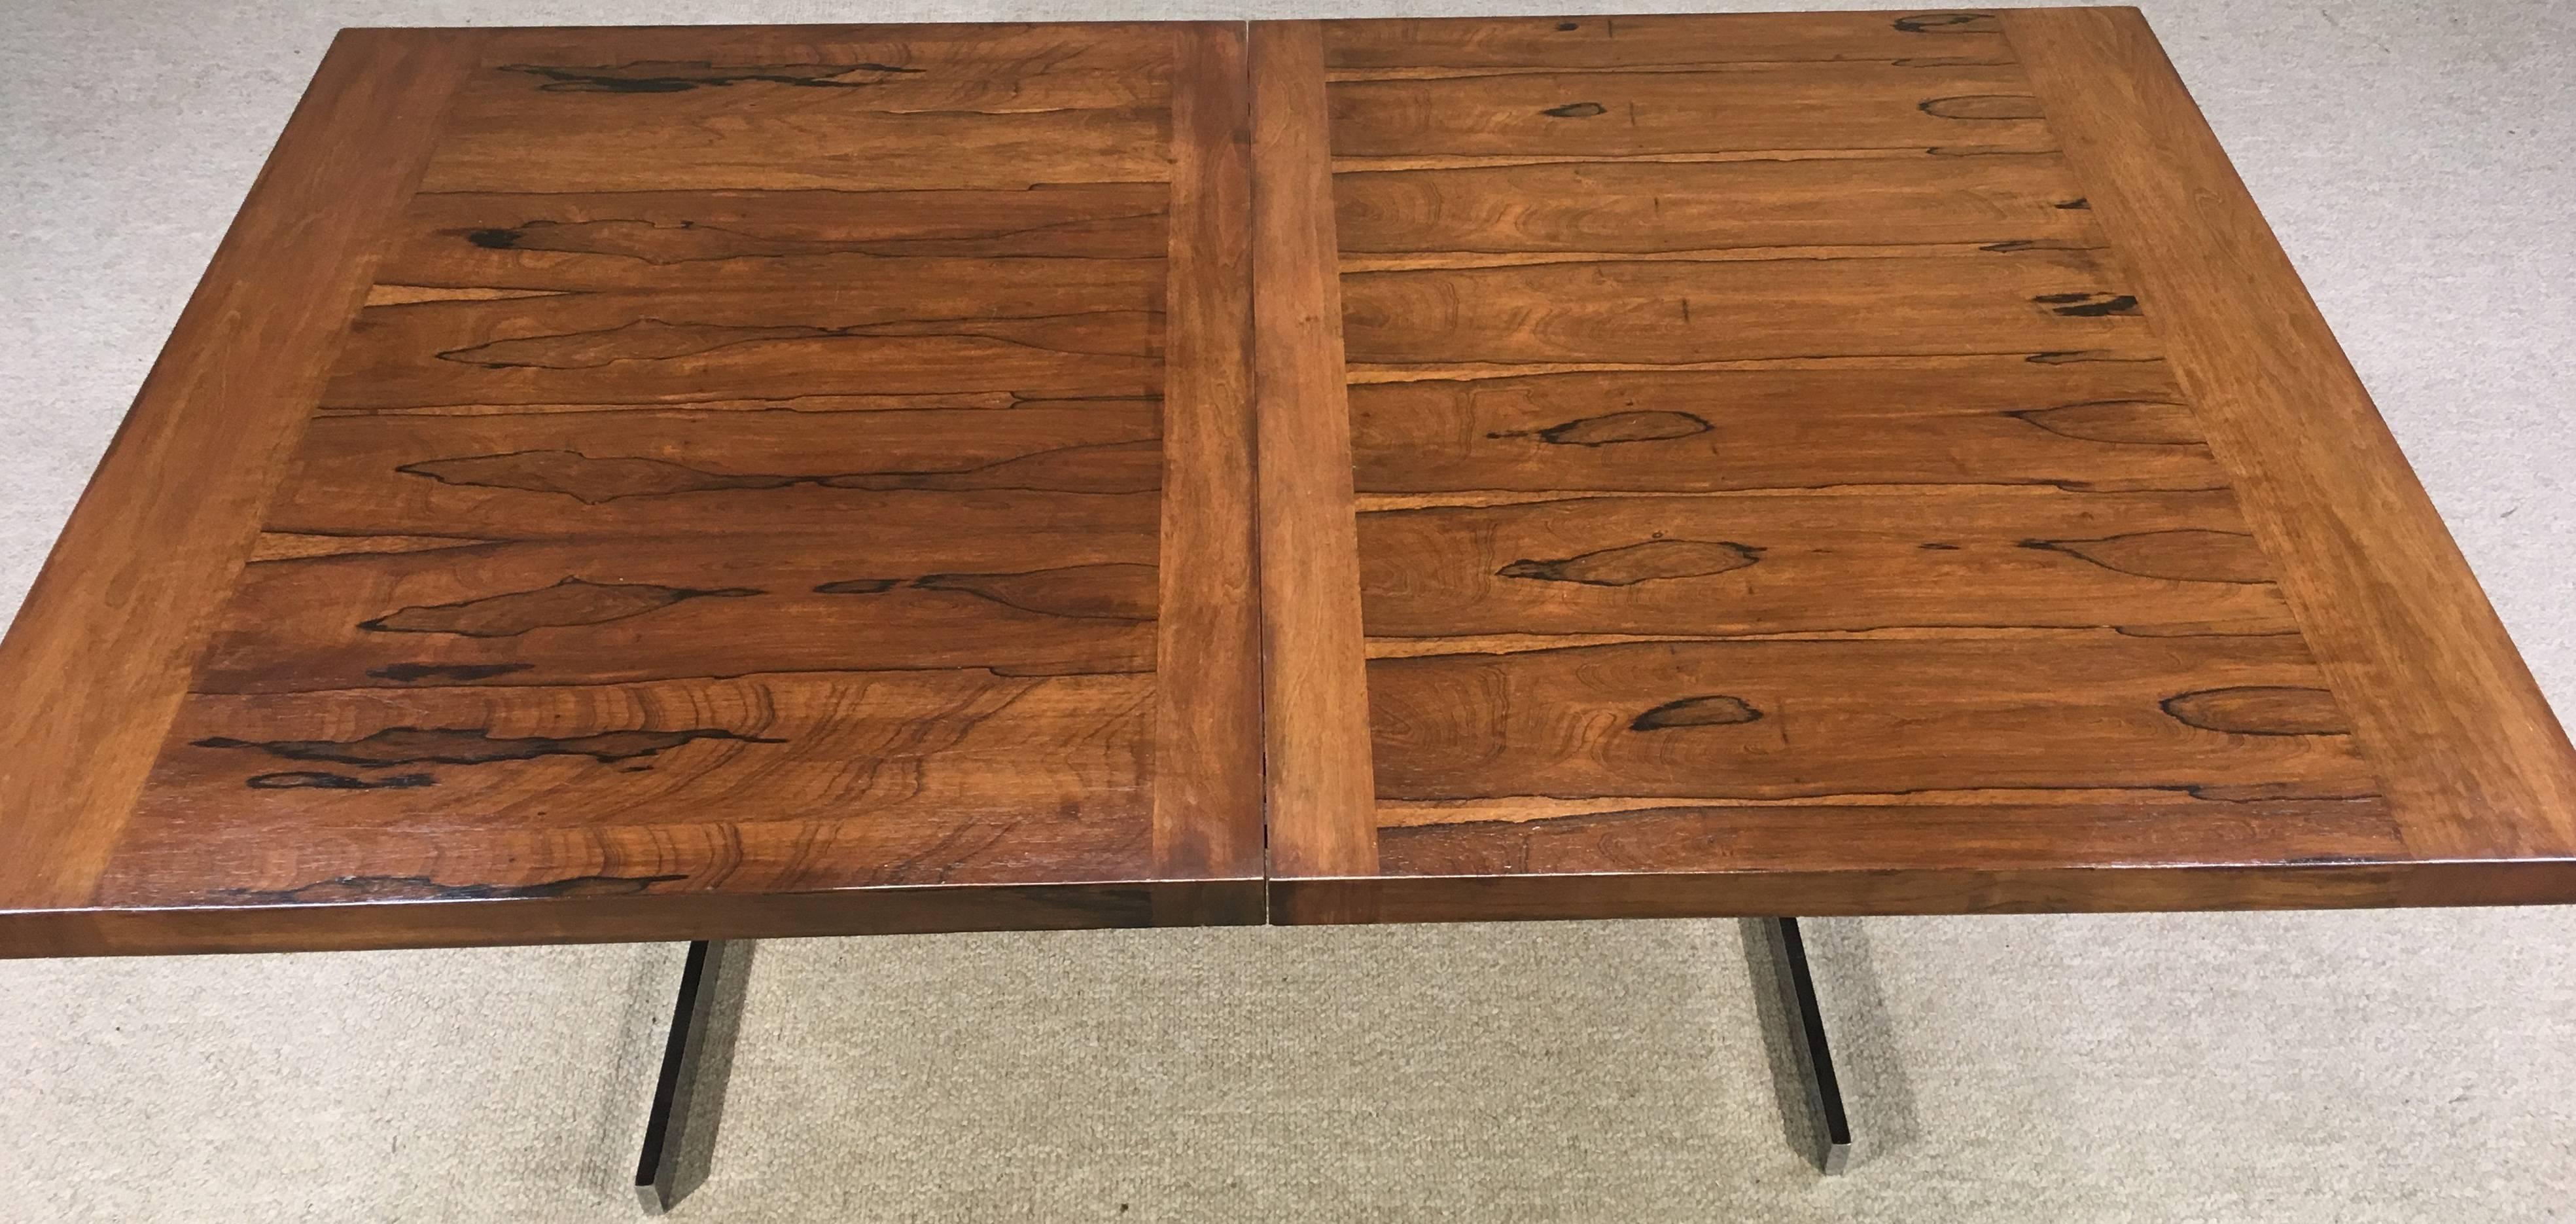 Veneer Milo Baughman Style Rosewood, Walnut and Chrome Expanding Dining Table